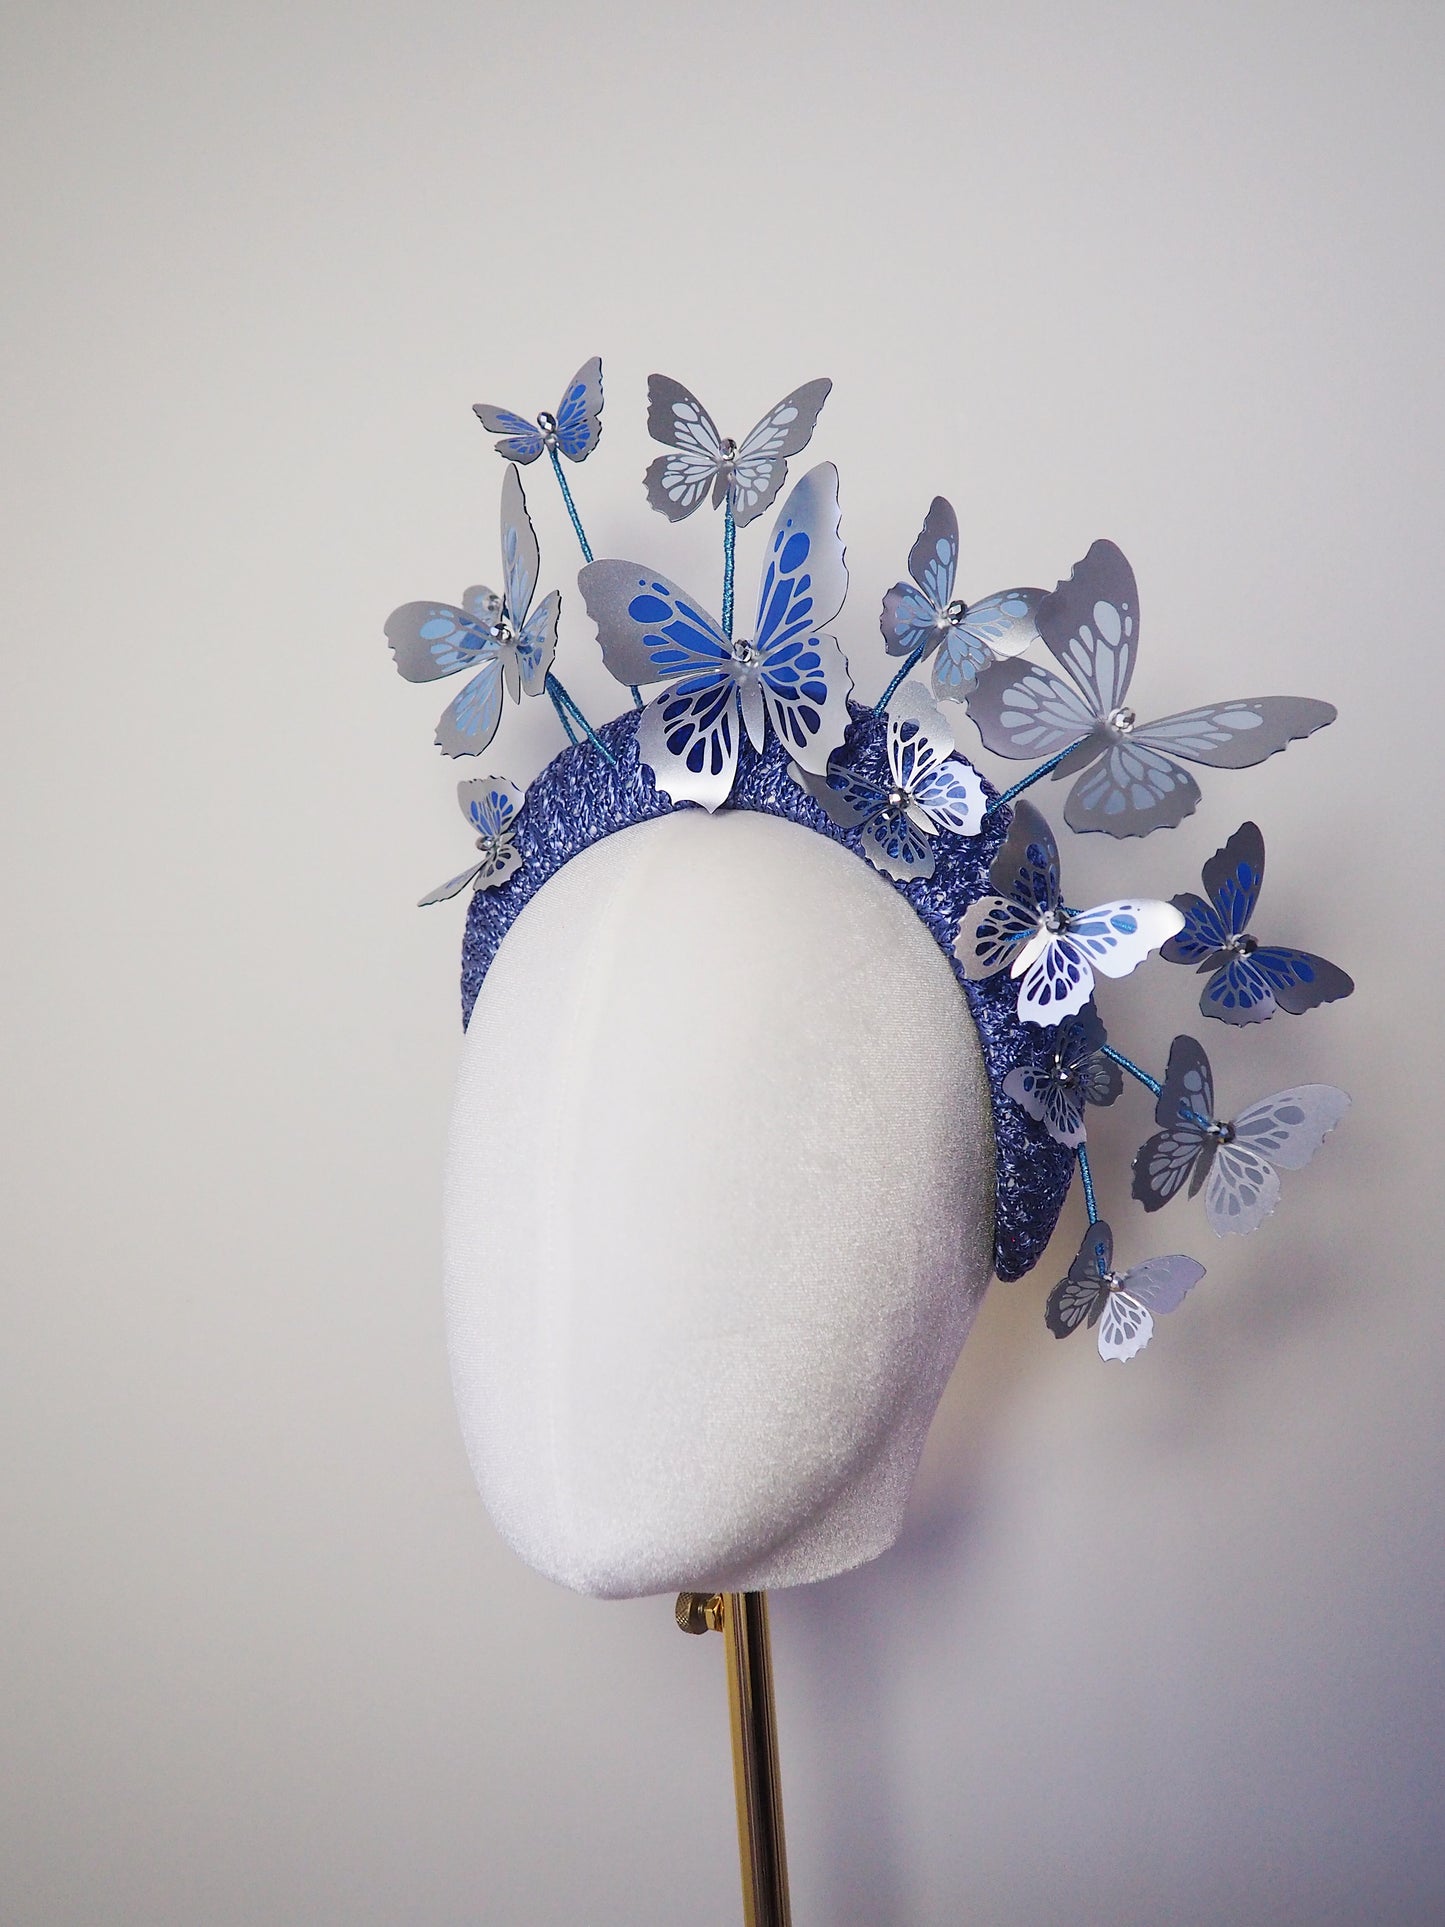 Flutter and fly - Crystoform butterflies in shades of blue with silver detail on a 3d vintage straw headband.